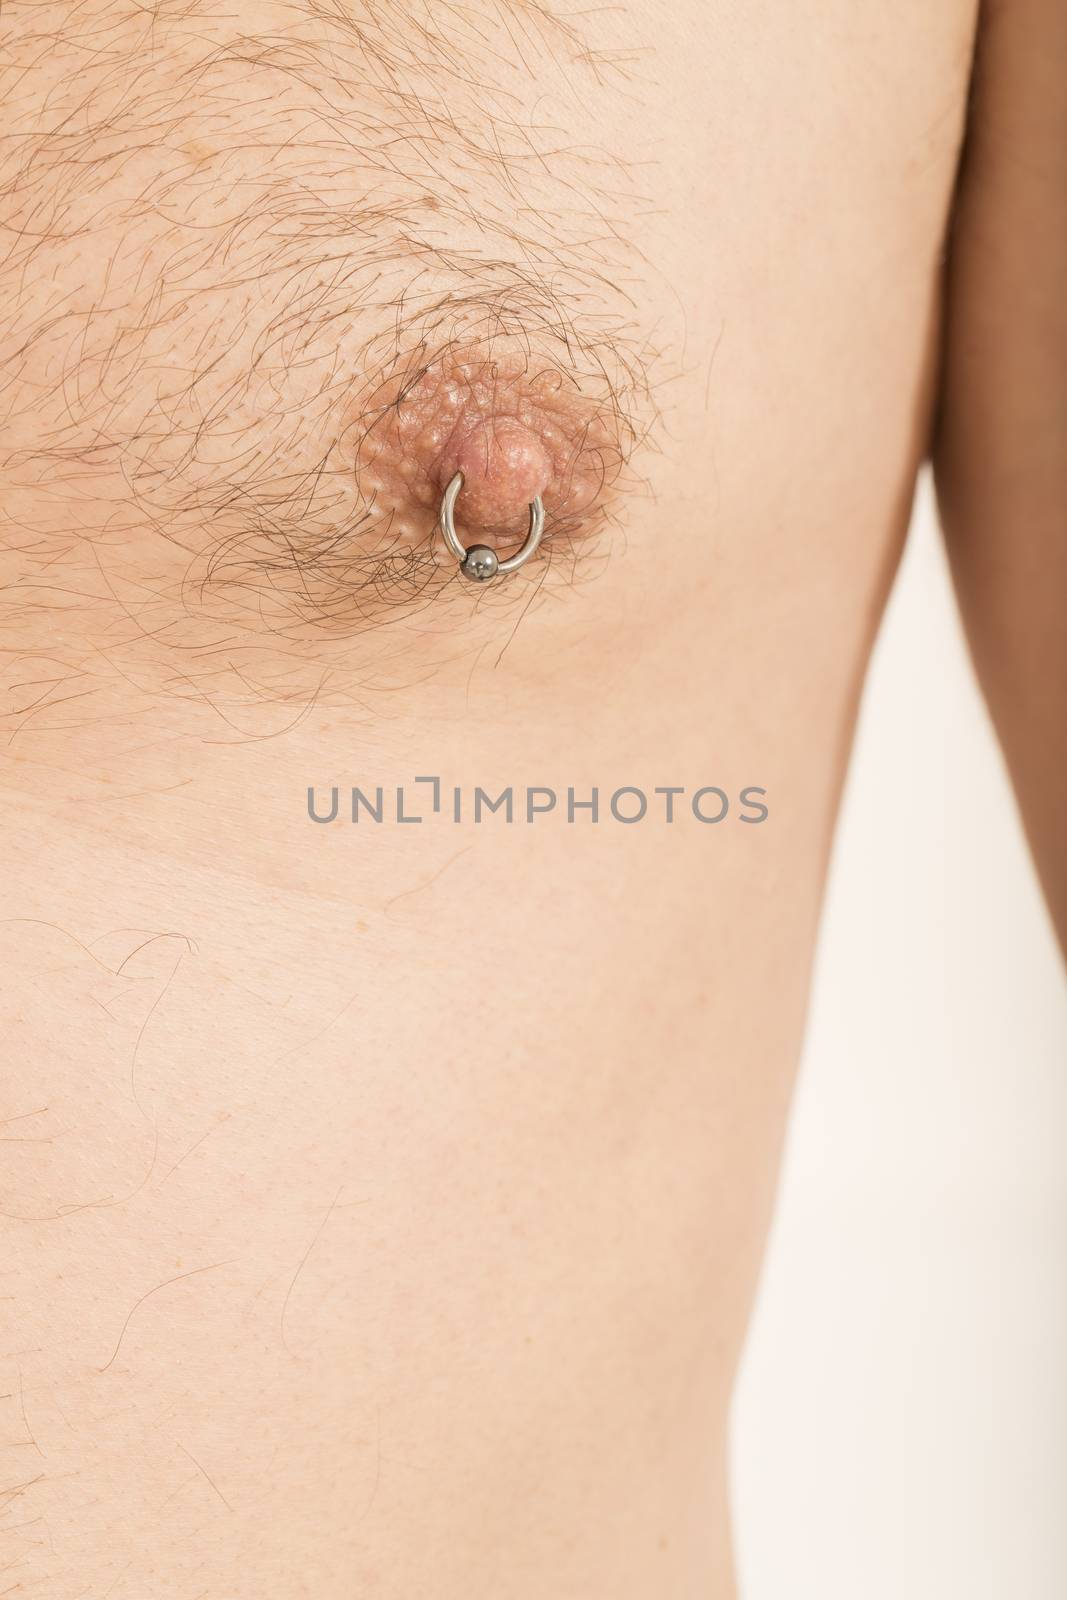 Close up of muscular male torso with a nipple piercing